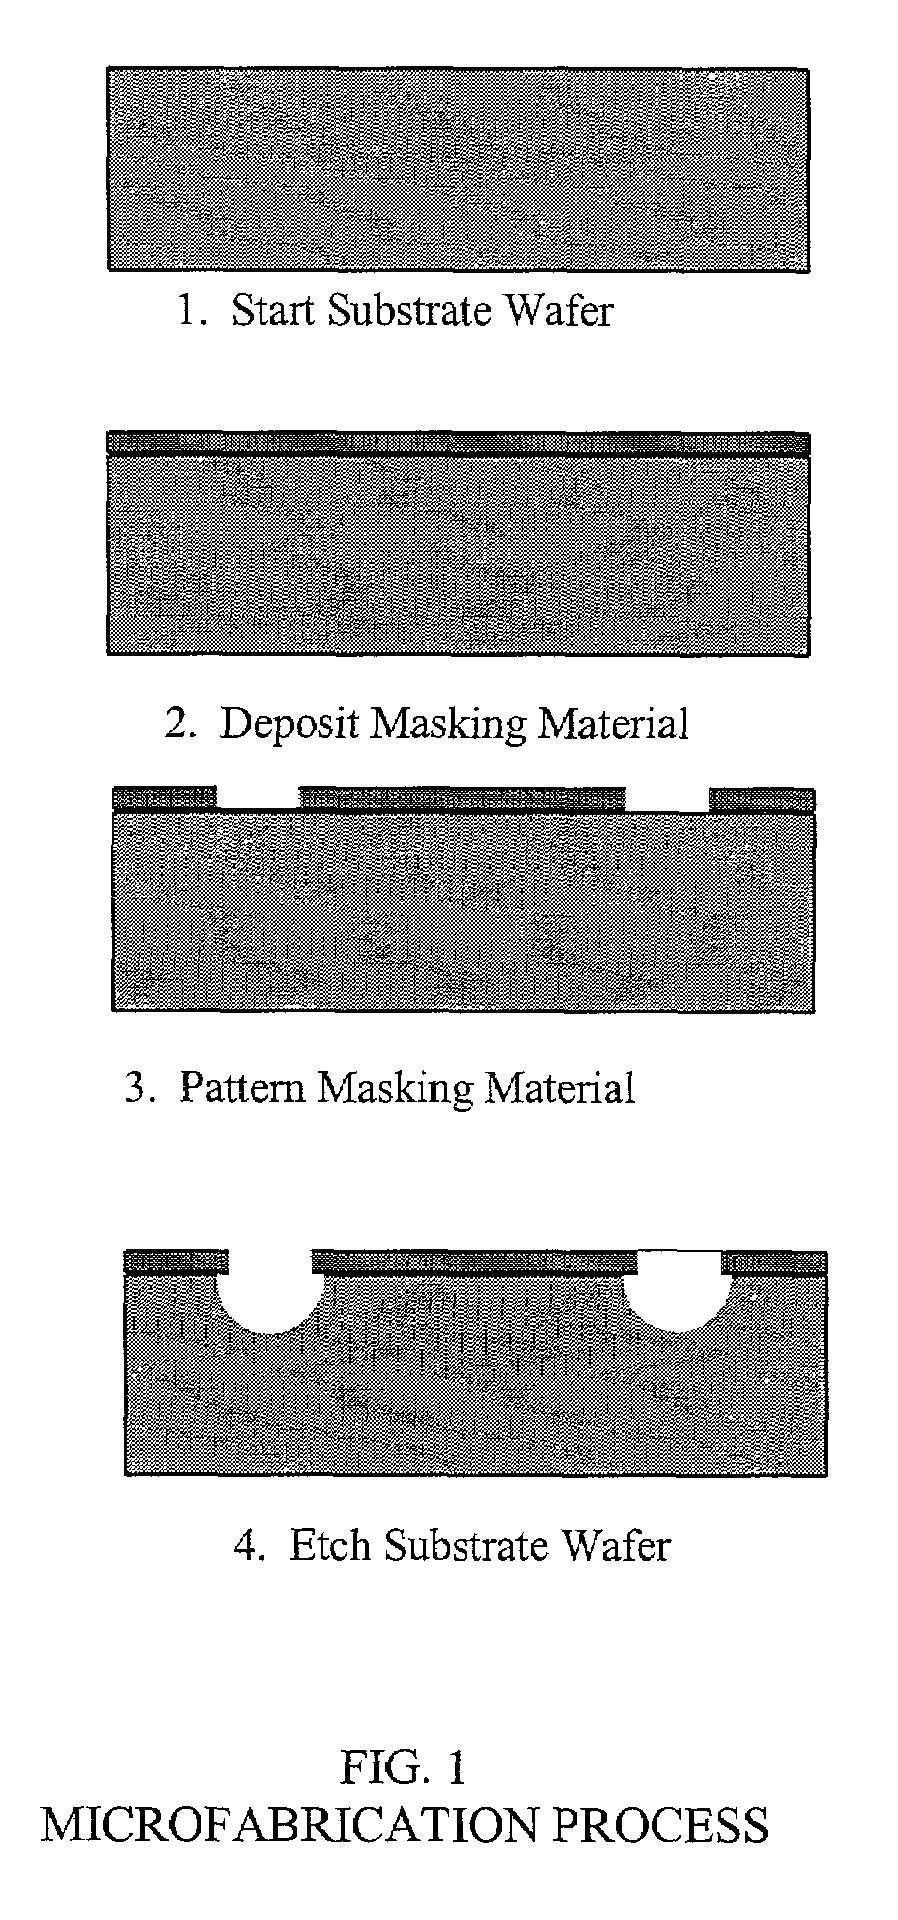 Multilayer device for tissue engineering